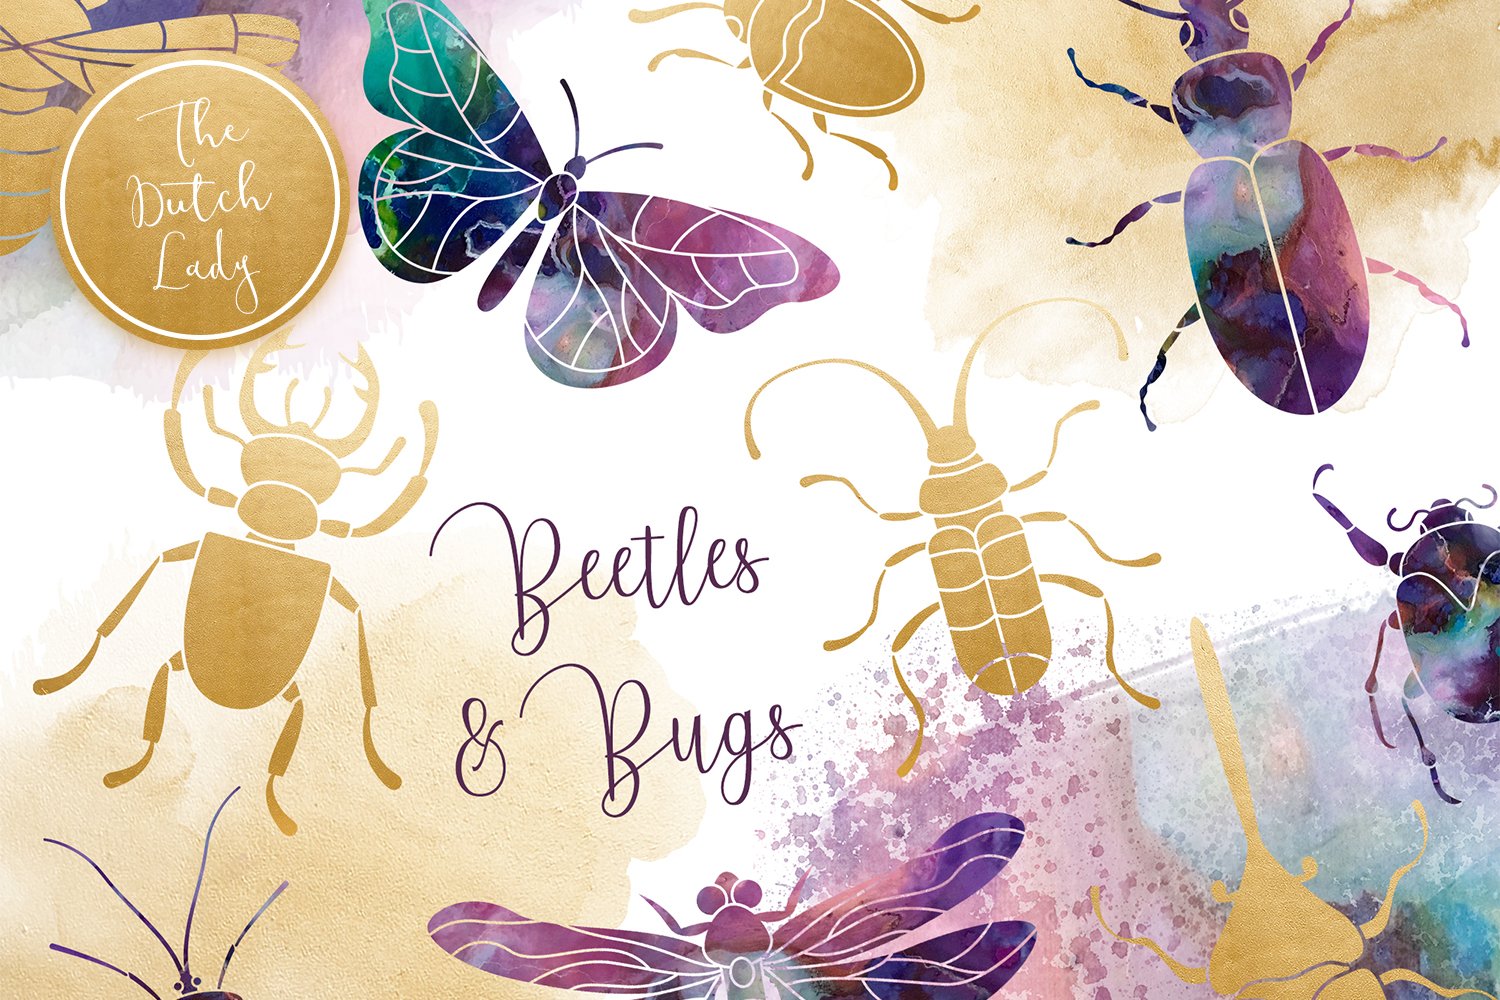 Beetles & Bugs Clipart Set cover image.